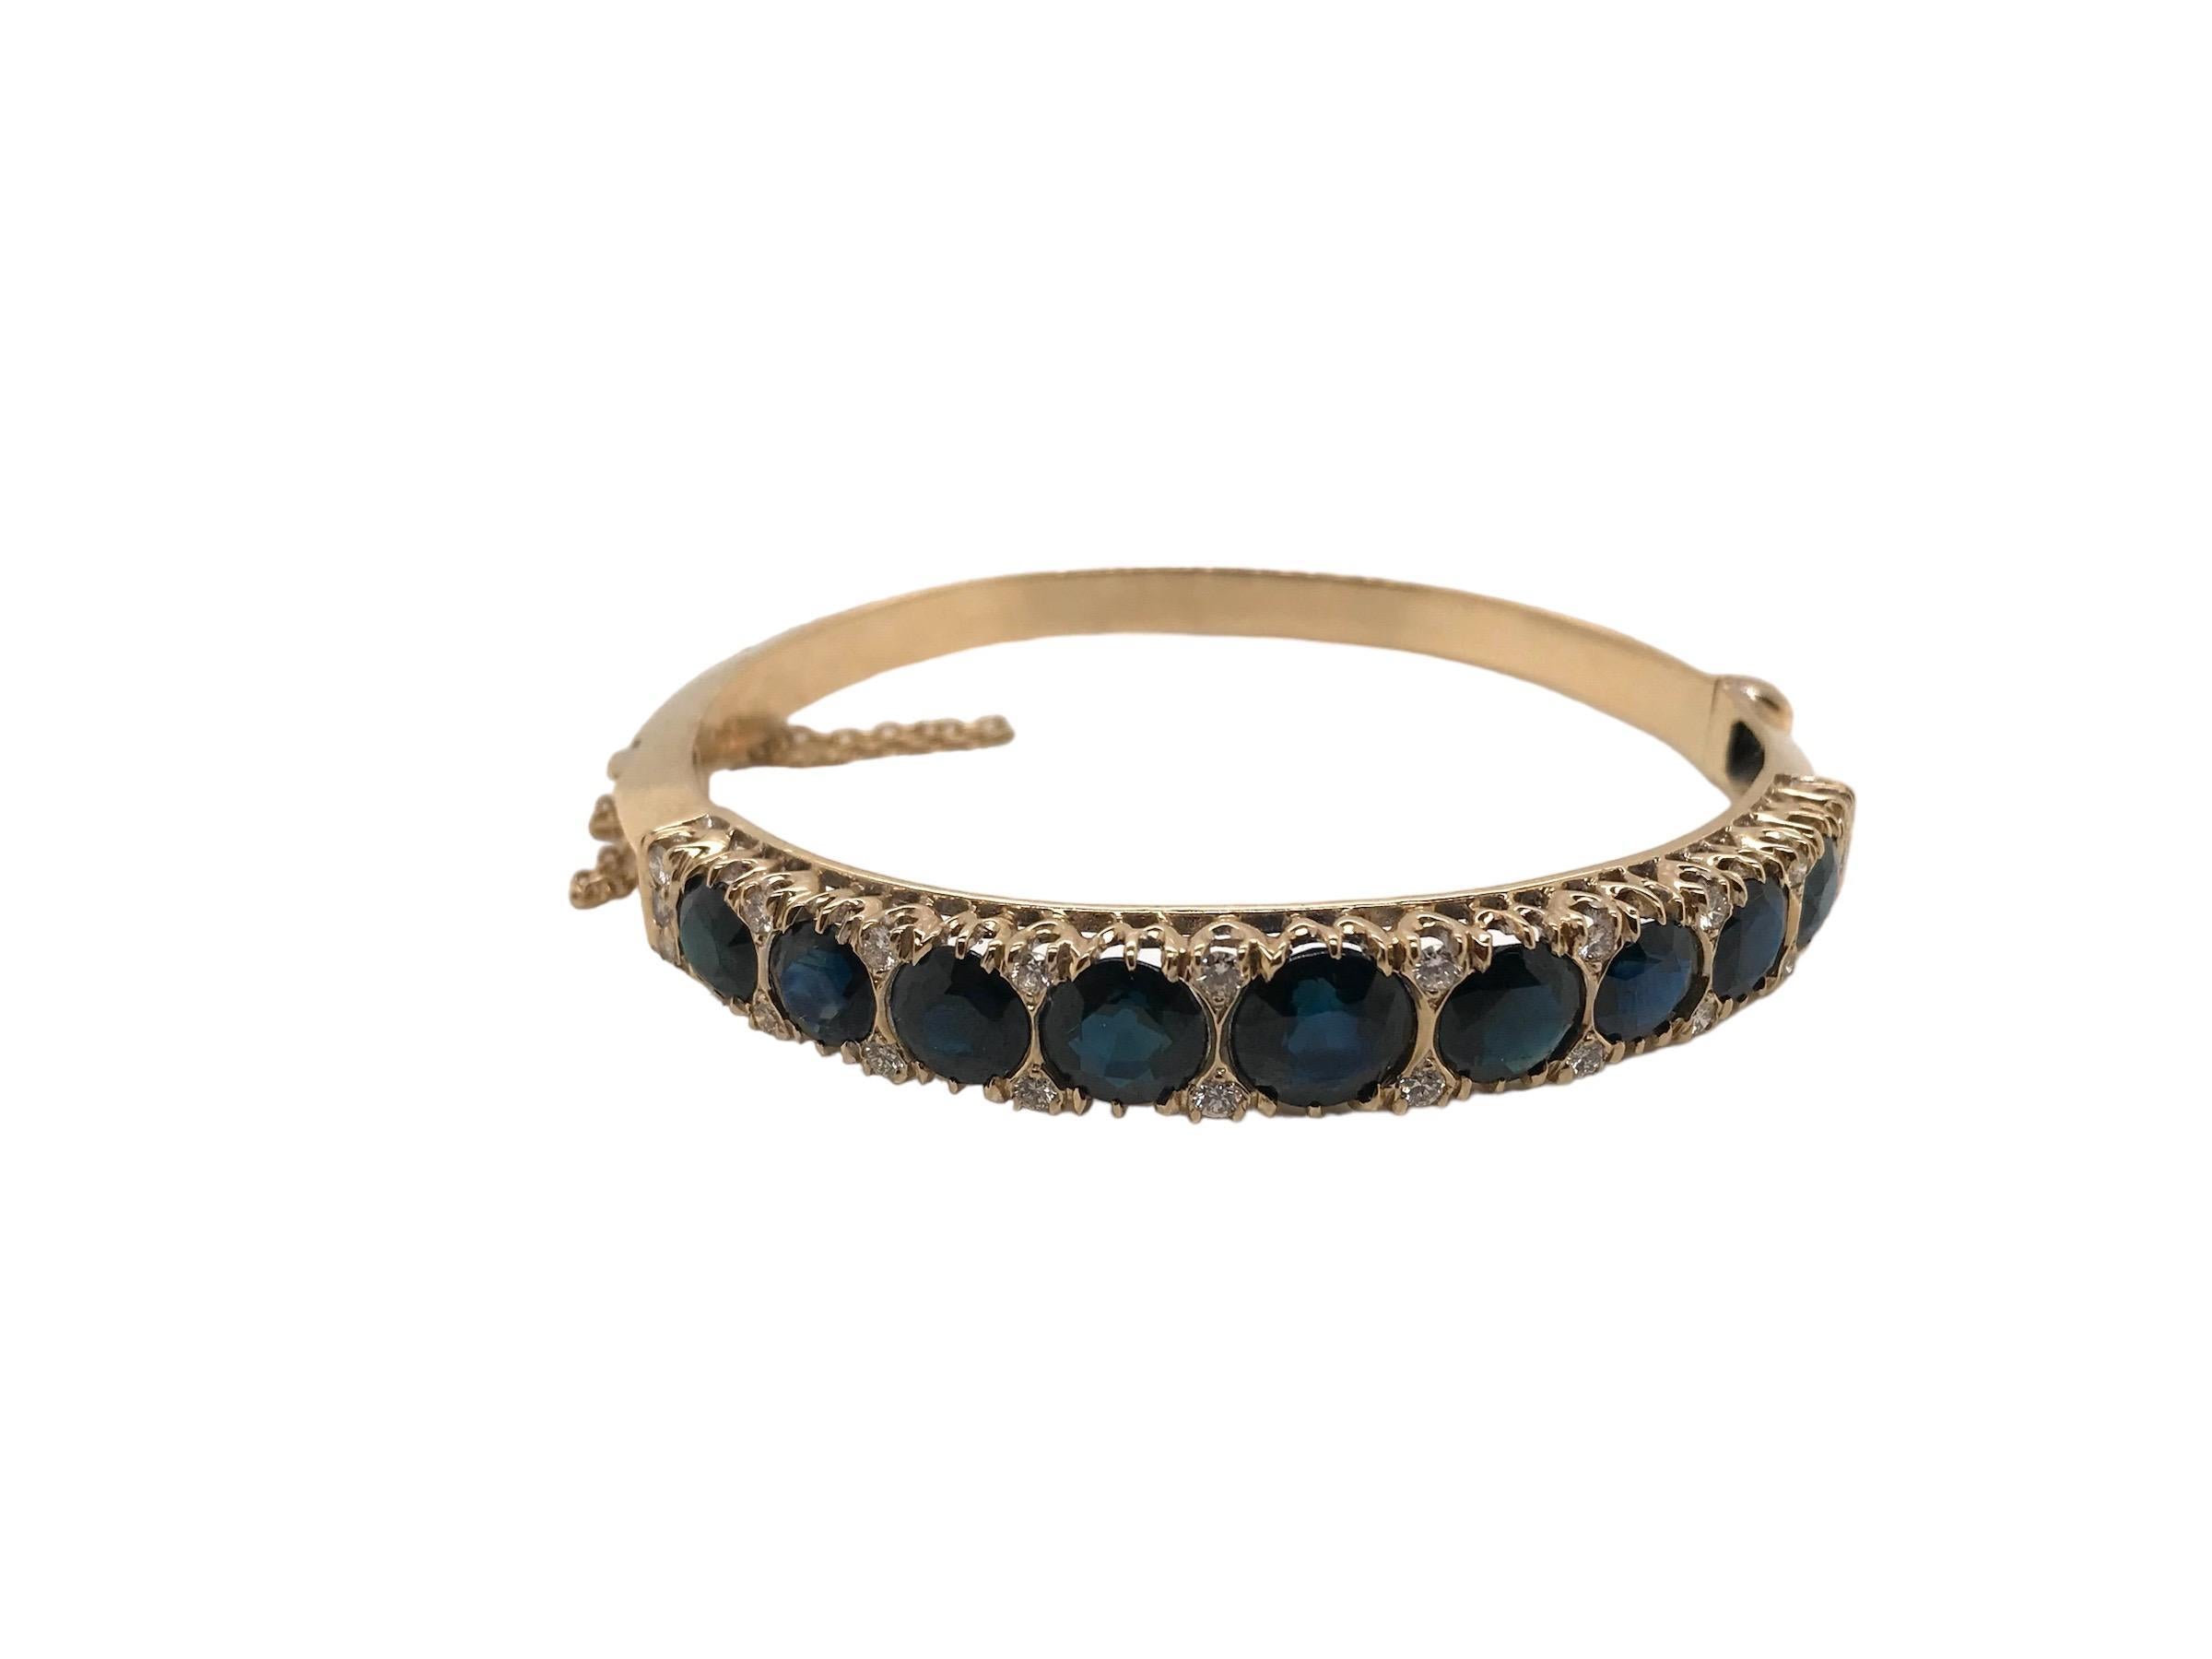 This lovely vintage Retro Era, 1940 - 1960, bangle bracelet is perfection! Set in 14K Yellow Gold and featuring 9 magnificent midnight blue natural sapphire gemstones, weighing approximately 8 Carats combined. Accenting the sapphires are 22